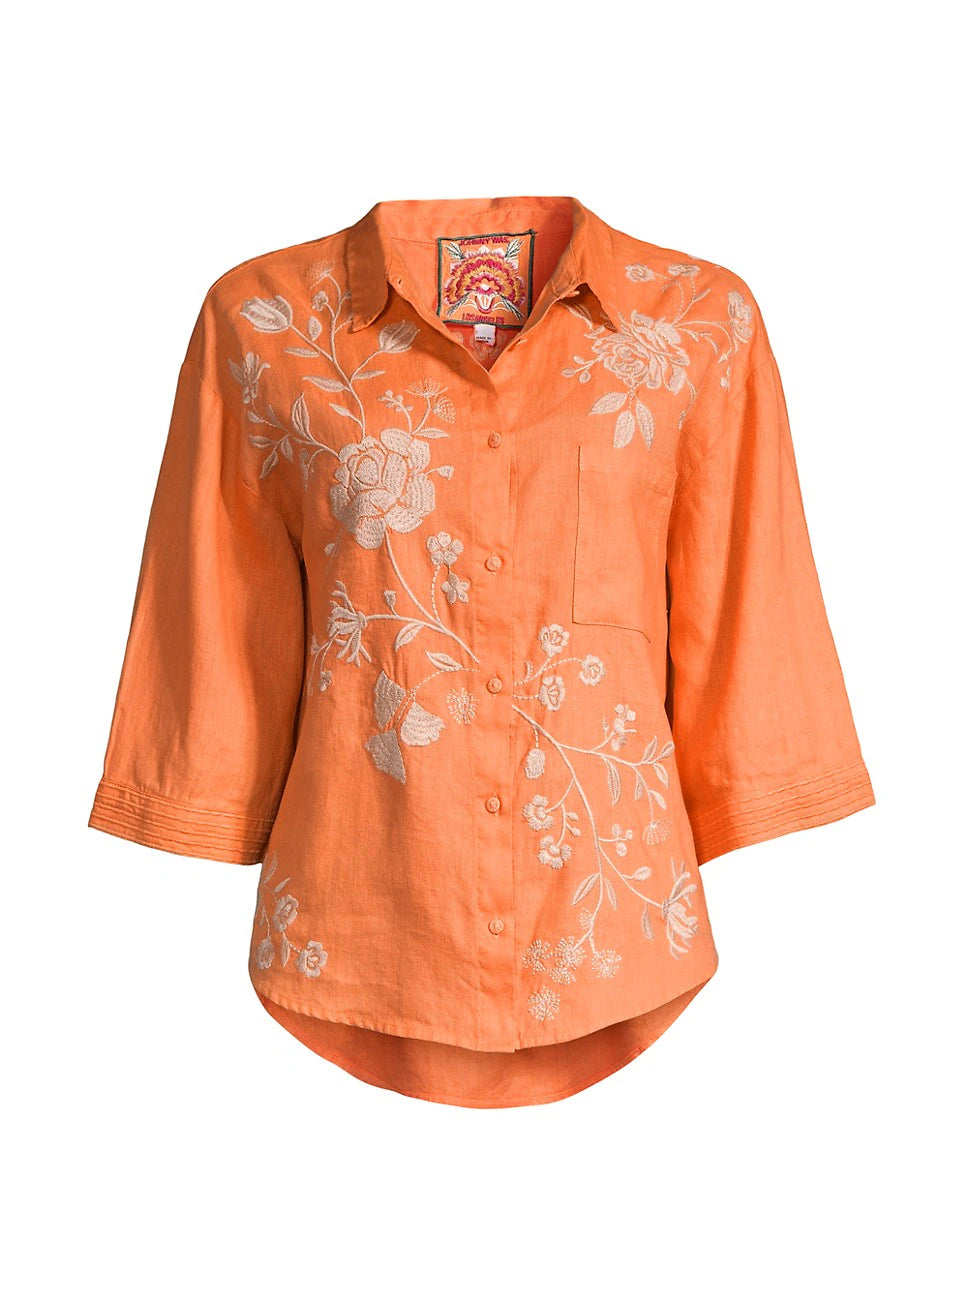 Johnny Was Lael Boxy Linen Shirt